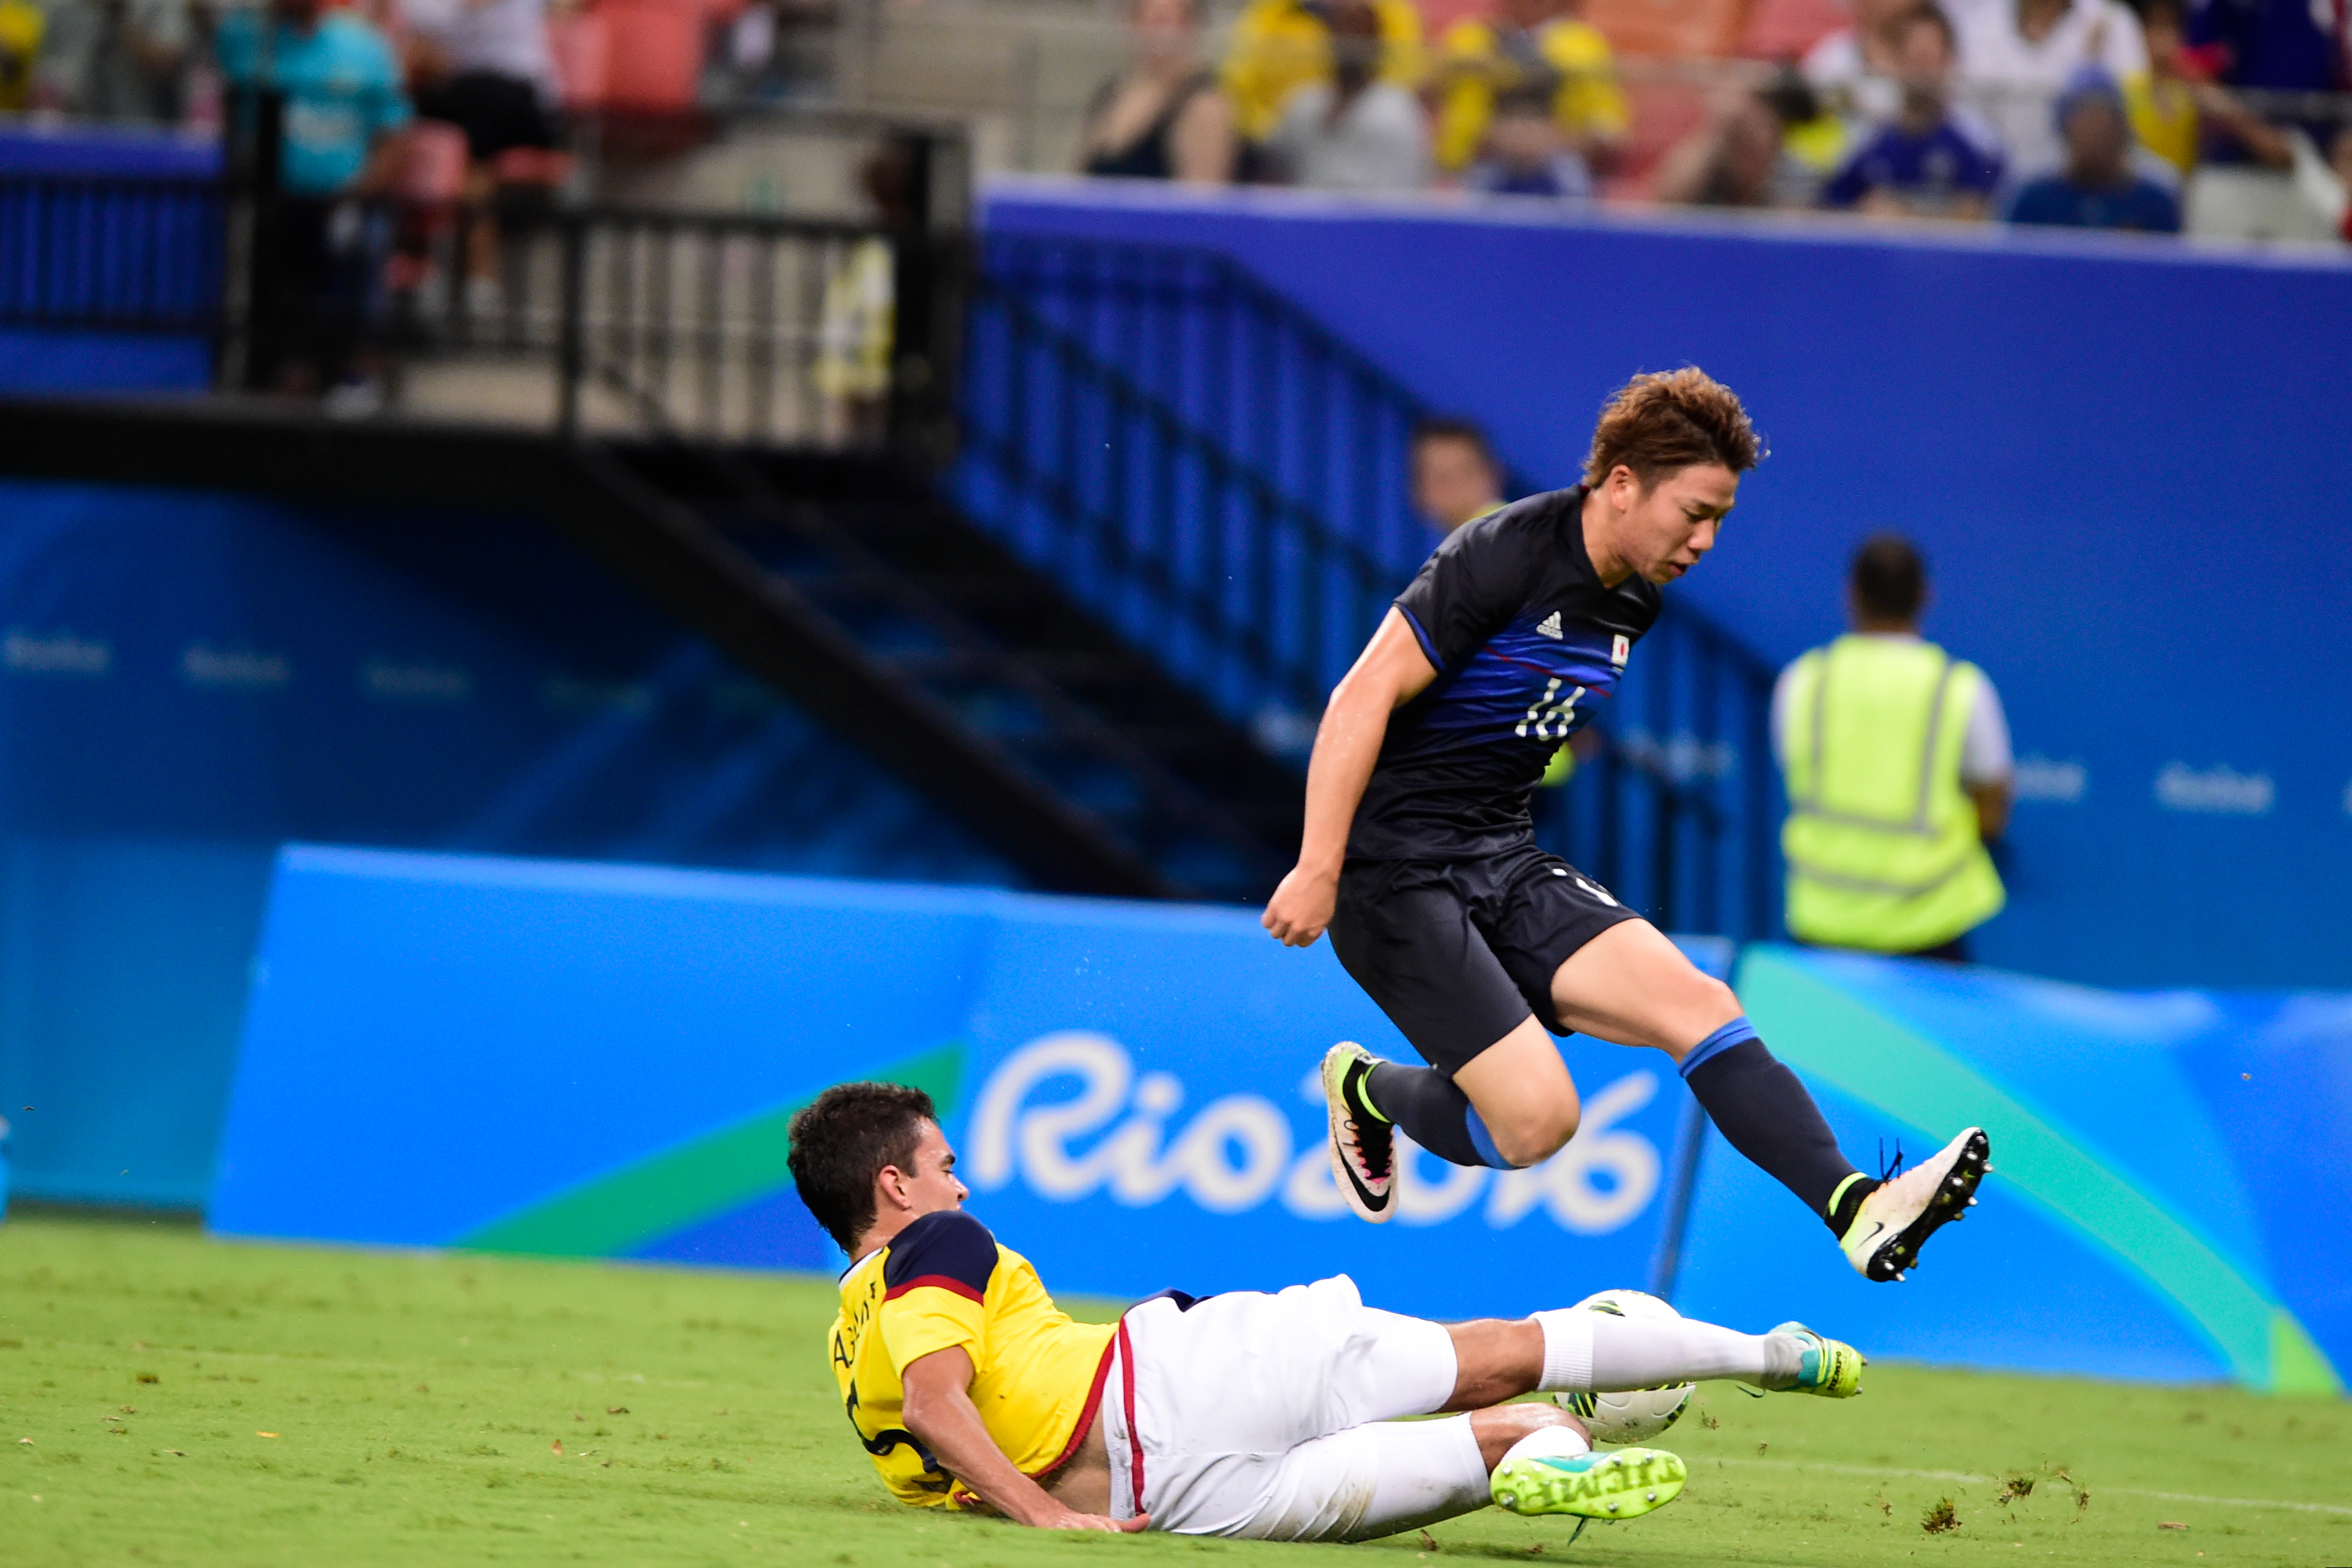 MANAUS, BRAZIL - AUGUST 07:  Takuma Asano player of Japan battles for the ball with Felipe Aguilar player of Colombia during 2016 Summer Olympics match between Japan and Colombi at Arena Amazonia on August 7, 2016 in Manaus, Brazil. (Photo by Bruno Zanardo/Getty Images)